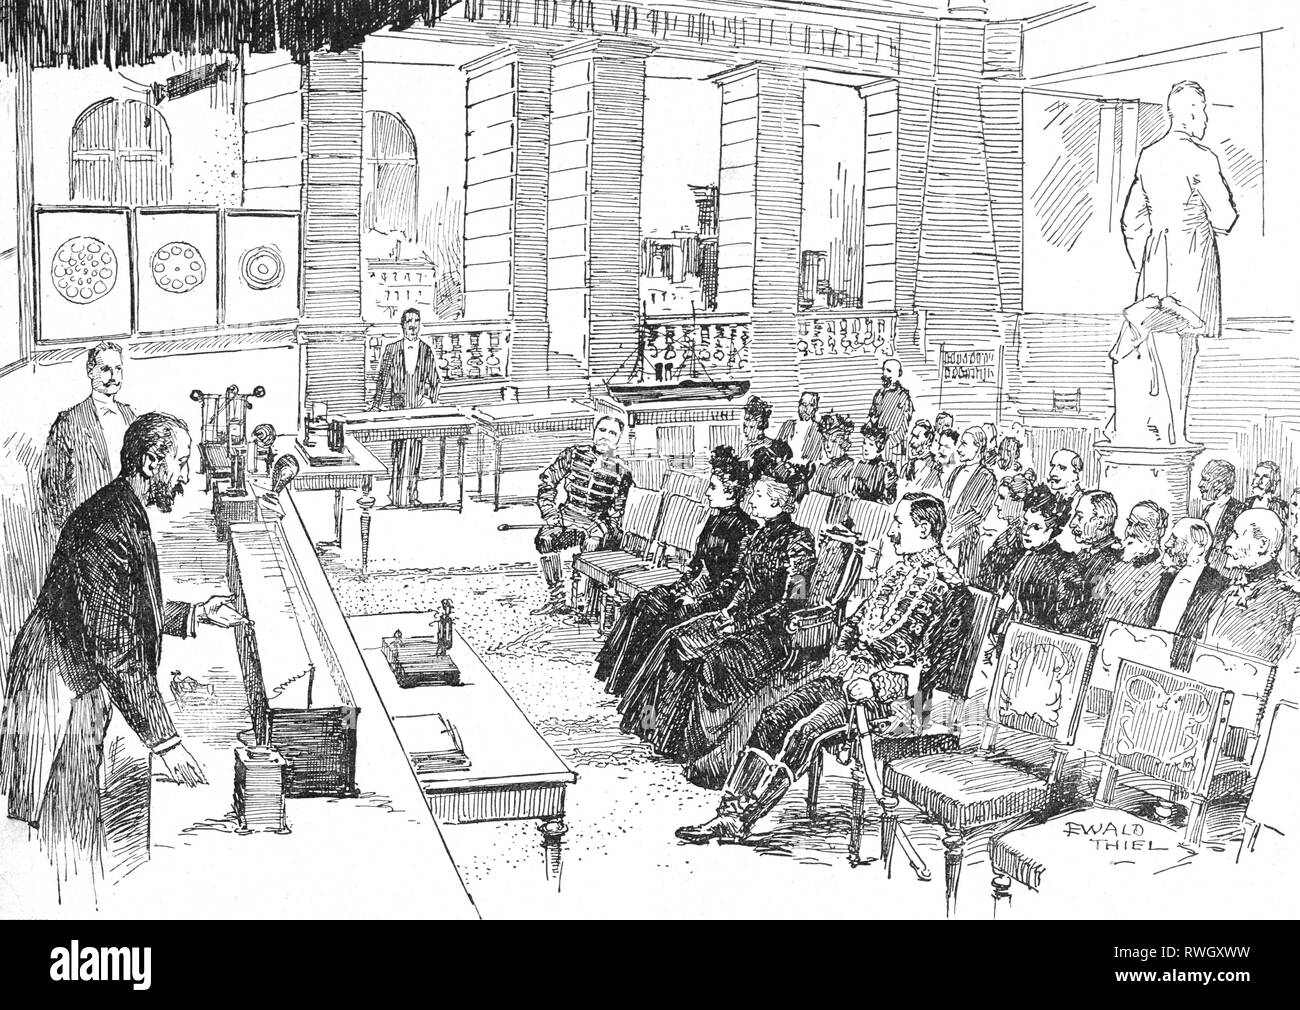 Strecker, Karl, 26.3.1858 - 24.8.1934, German physicist and electrical engineer, half length, holding of a lecture about cabel telegraphy in presence of the Imperial couple, Imperial Mail Musuem, Berlin, wood engraving based on drawing by Ewald Thiel, 'Die Woche', 1900, Artist's Copyright has not to be cleared Stock Photo